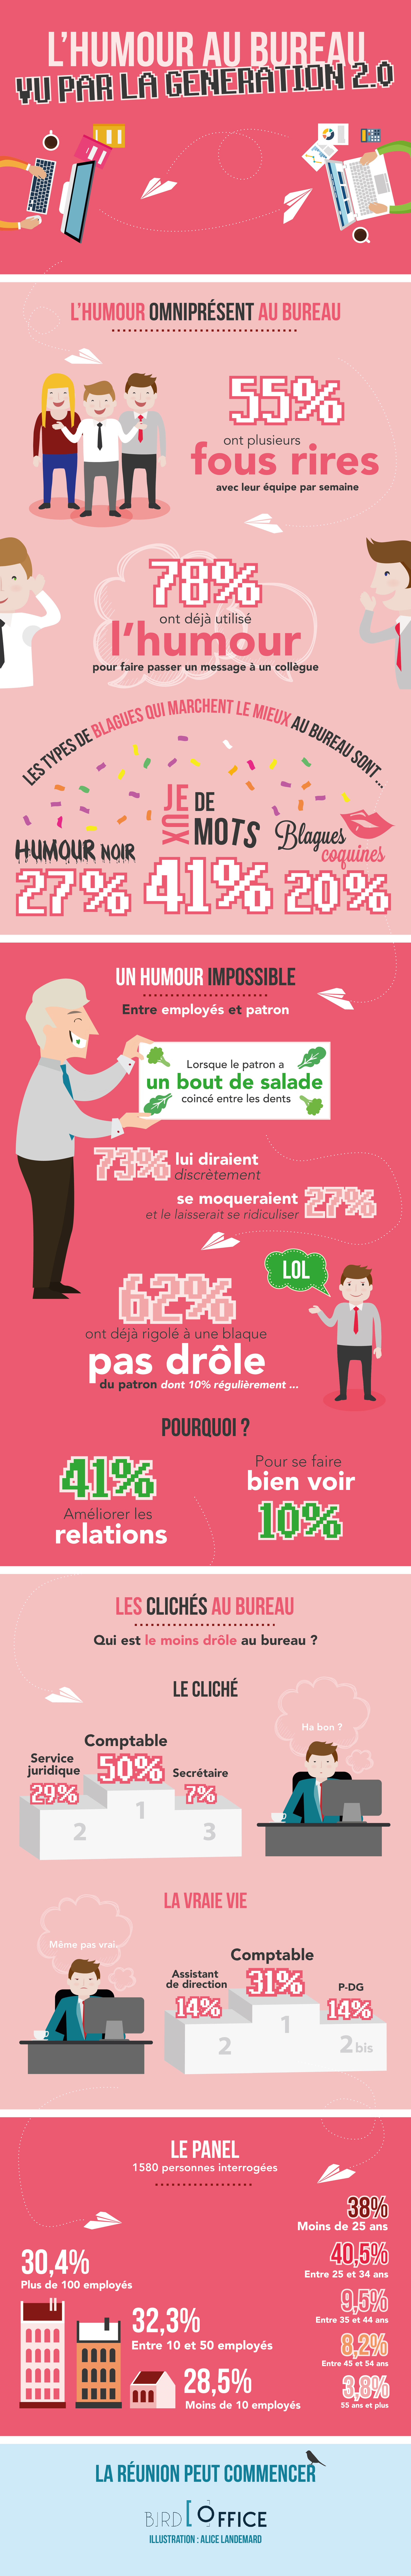 infographie-humour-AVRIL2015-01